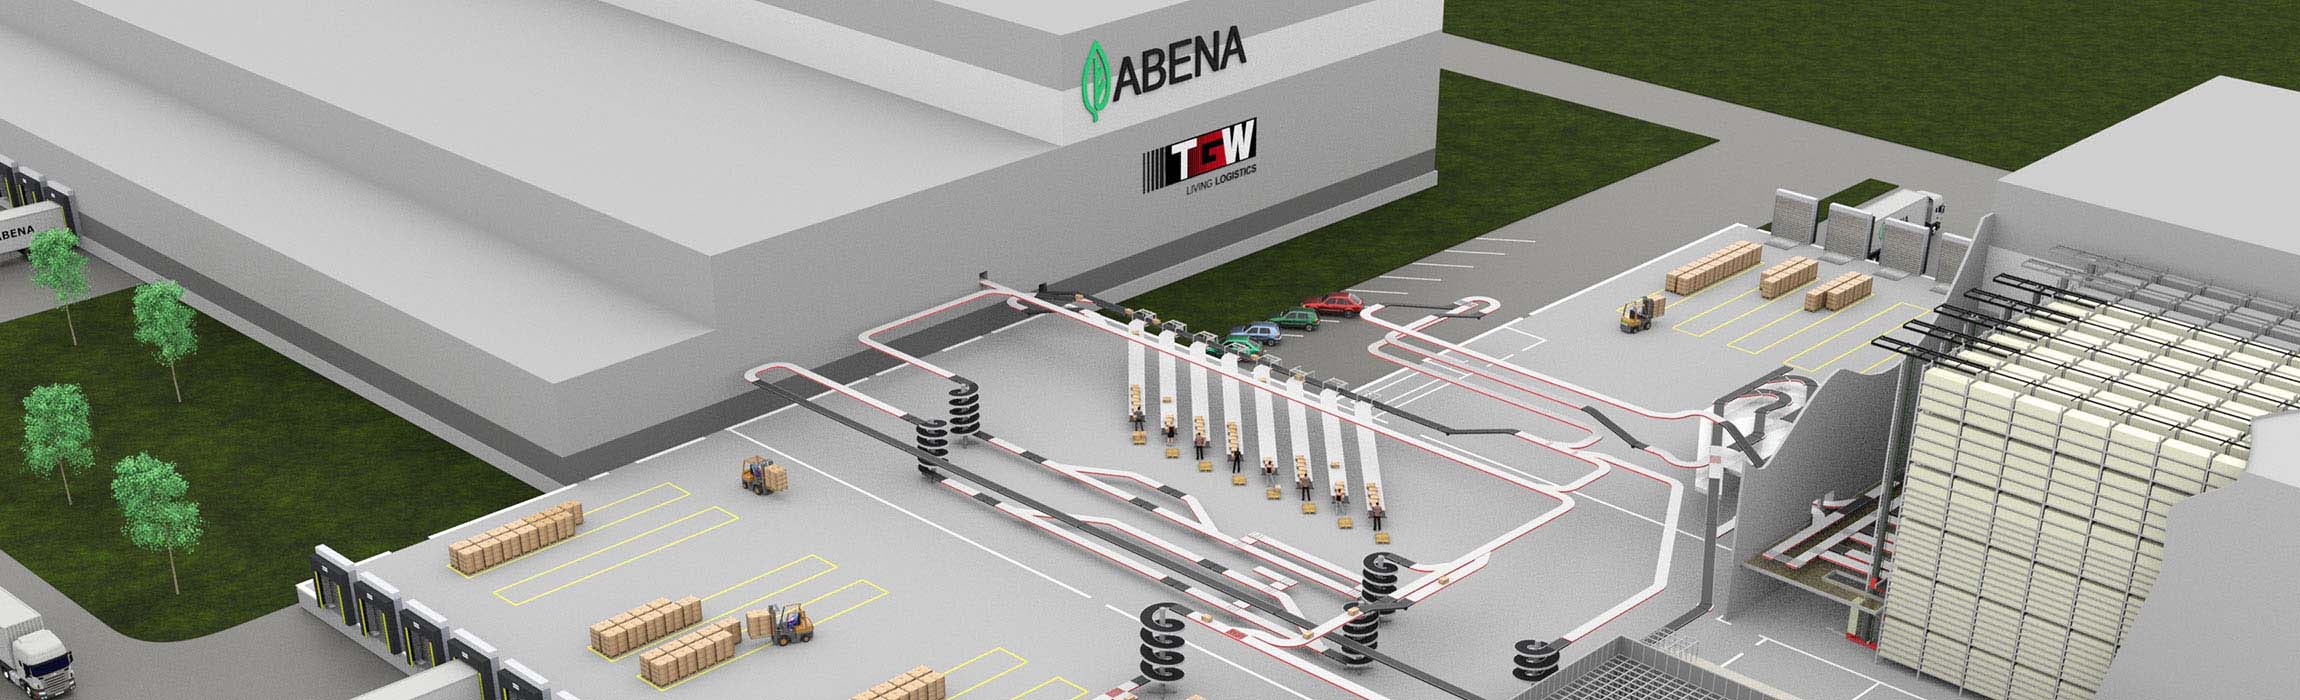 Abena relies on TGW know-how for the expansion of its logistics centre.